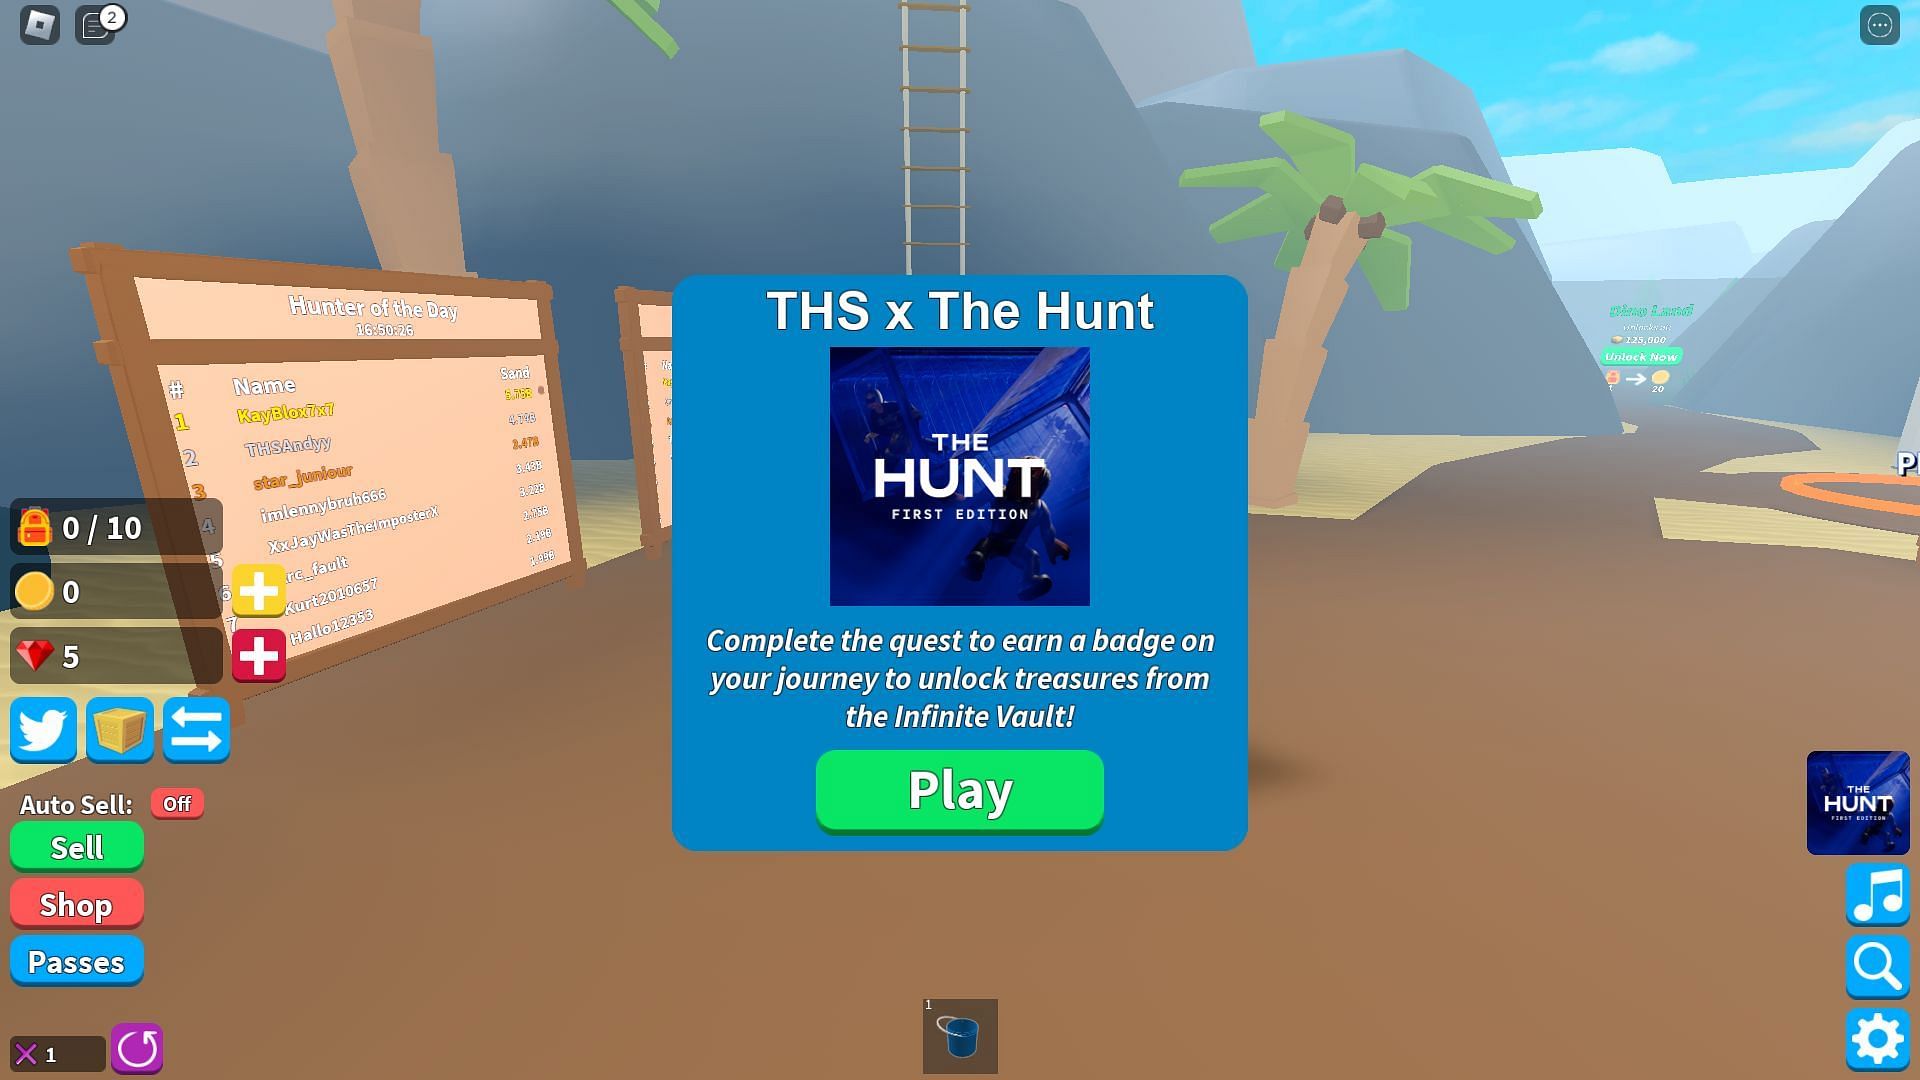 Introduction to The Hunt in THS (Image via Roblox)